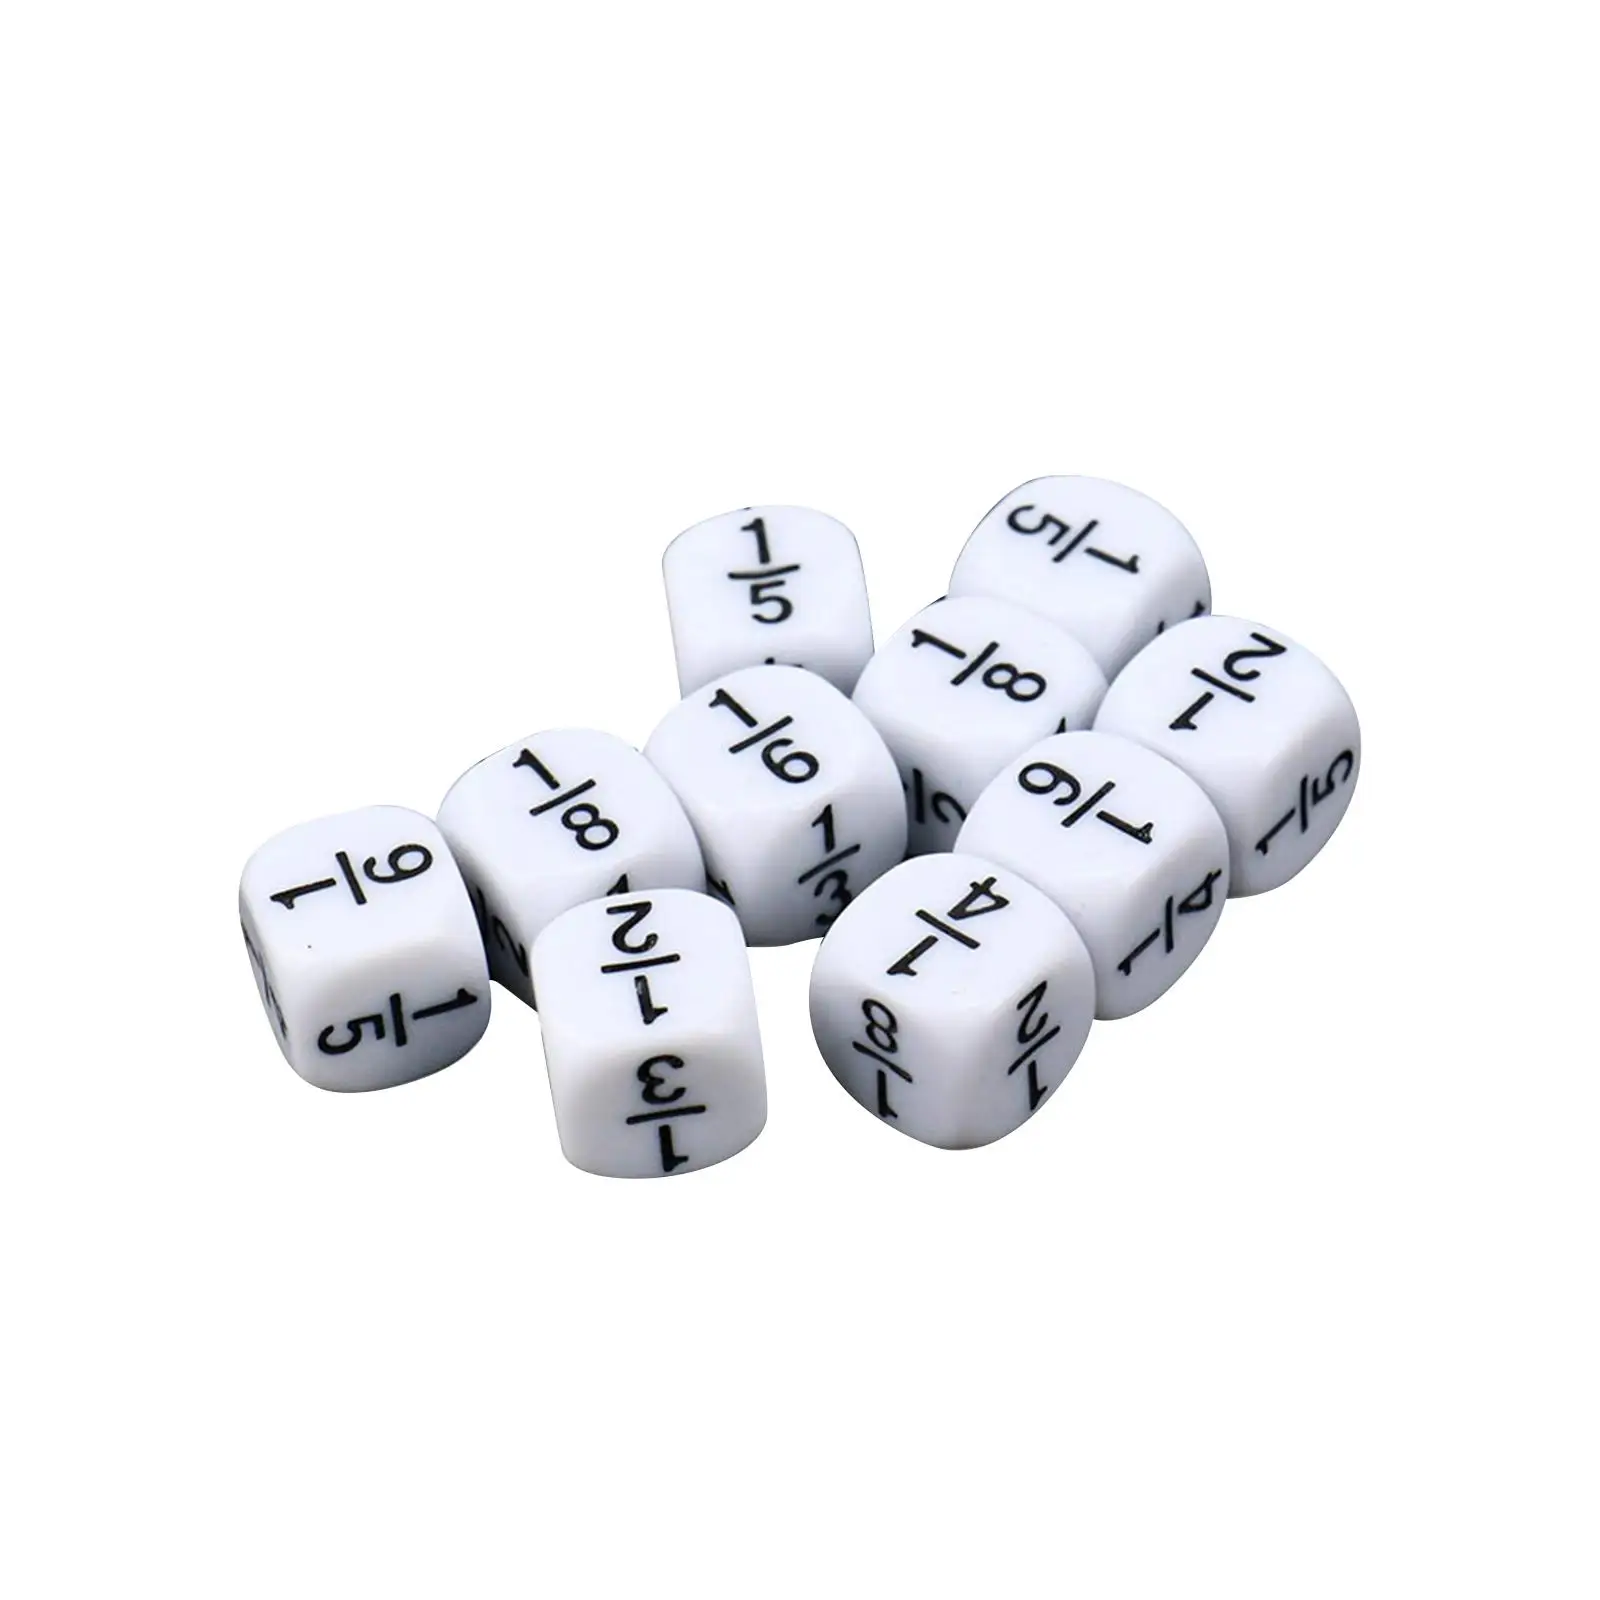 10 Pieces Fractional Number Dices Educational Toy Accessories Measure 0.6x0.6inches Photo Prop Smooth Durable for Classroom